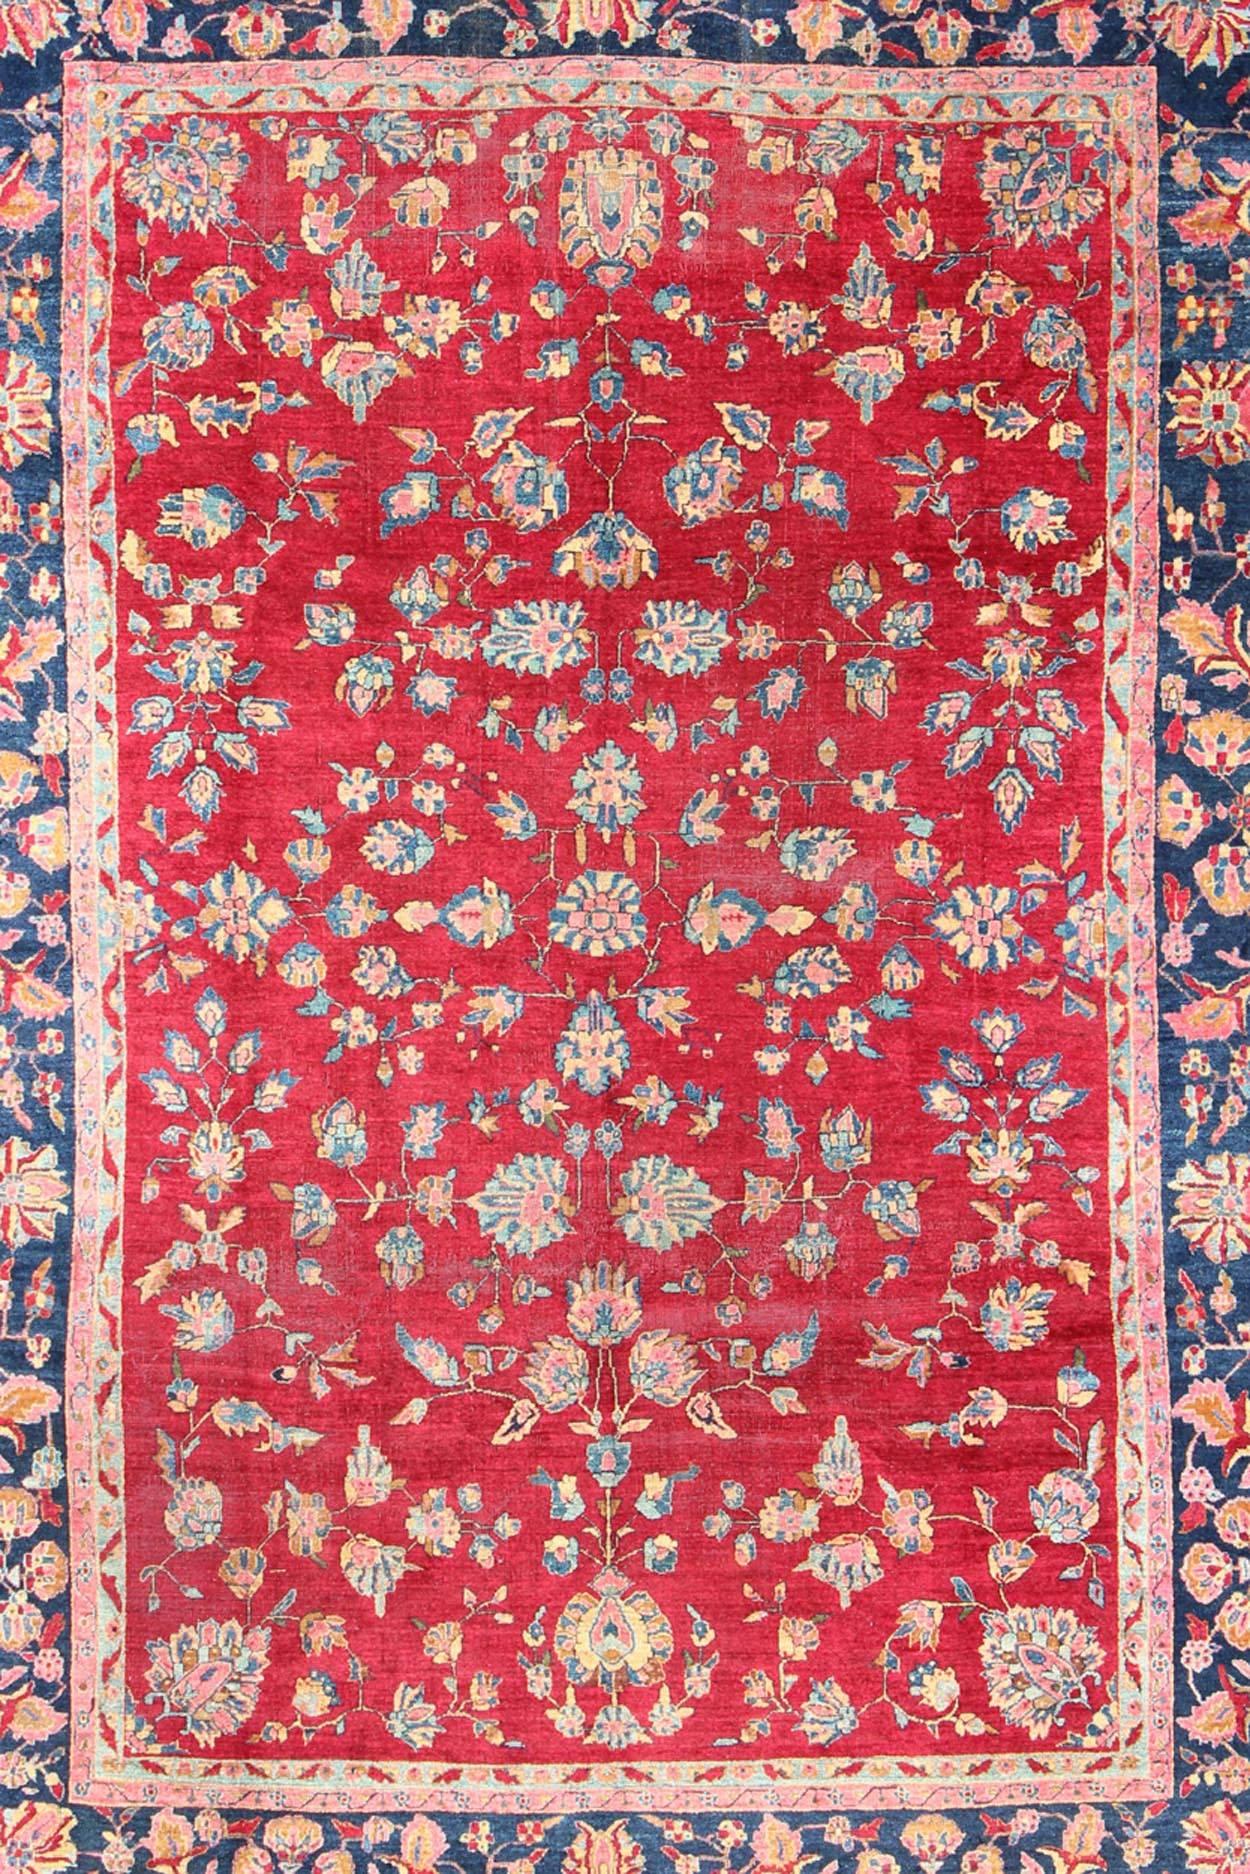 Sarouk Farahan All-Over Floral Design Antique Indian Amritsar Rug in Red and Blue Tones For Sale